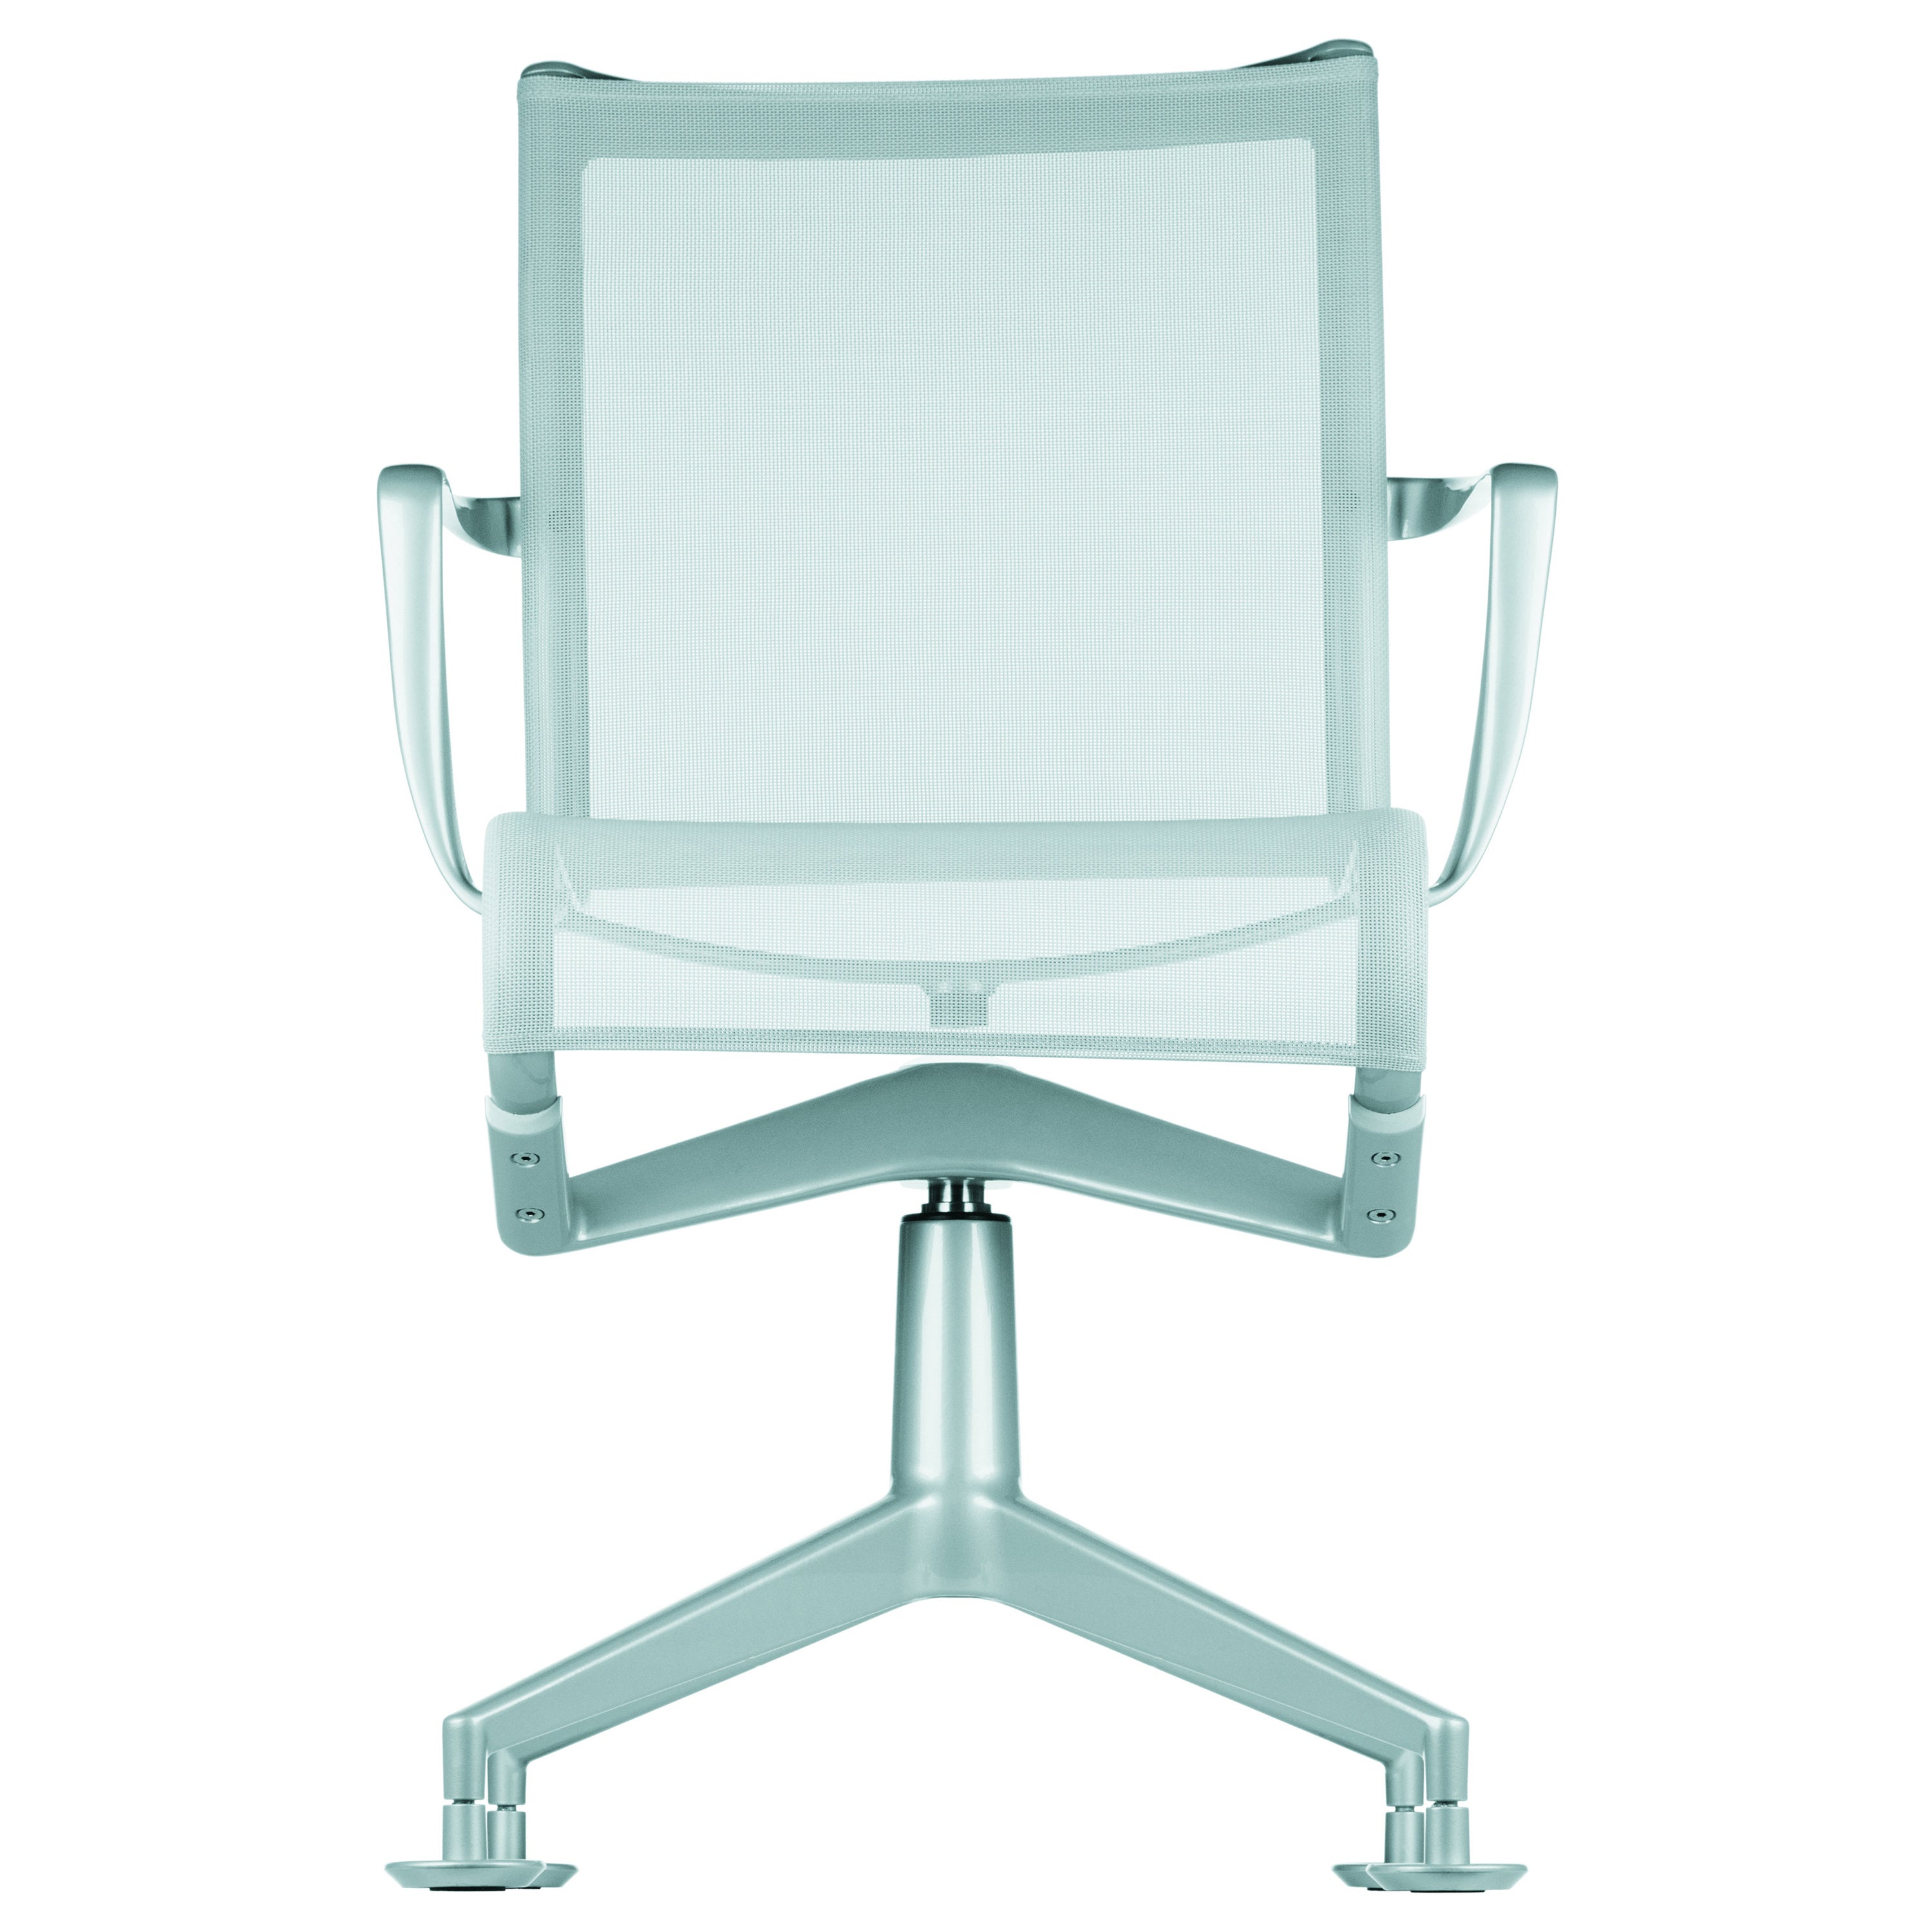 Alias 437 Meetingframe 44 Chair in White Mesh with Lacquered Aluminum Frame For Sale